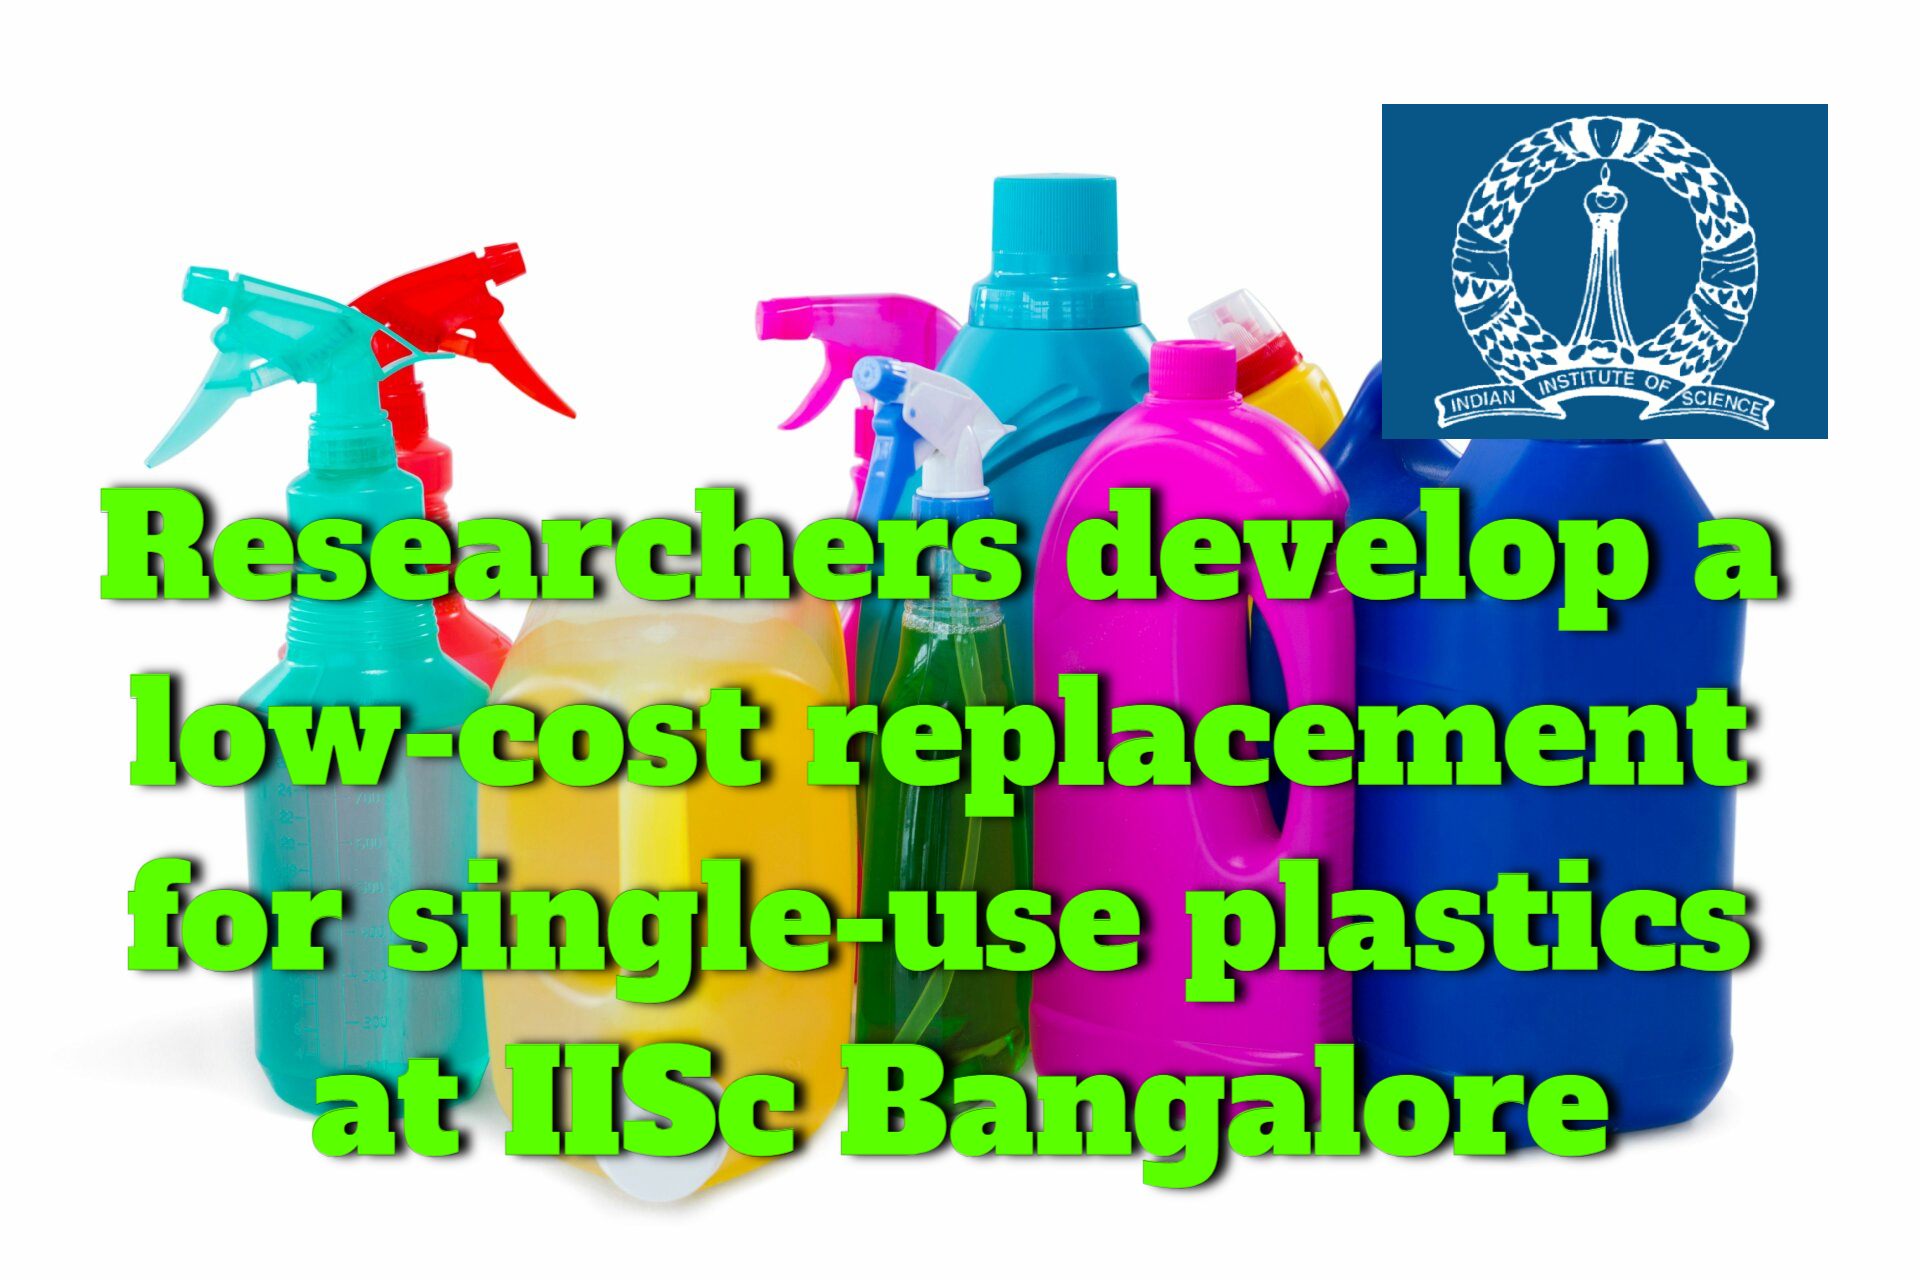 Researchers at IISc Bangalore develop a low-cost replacement for single-use plastics